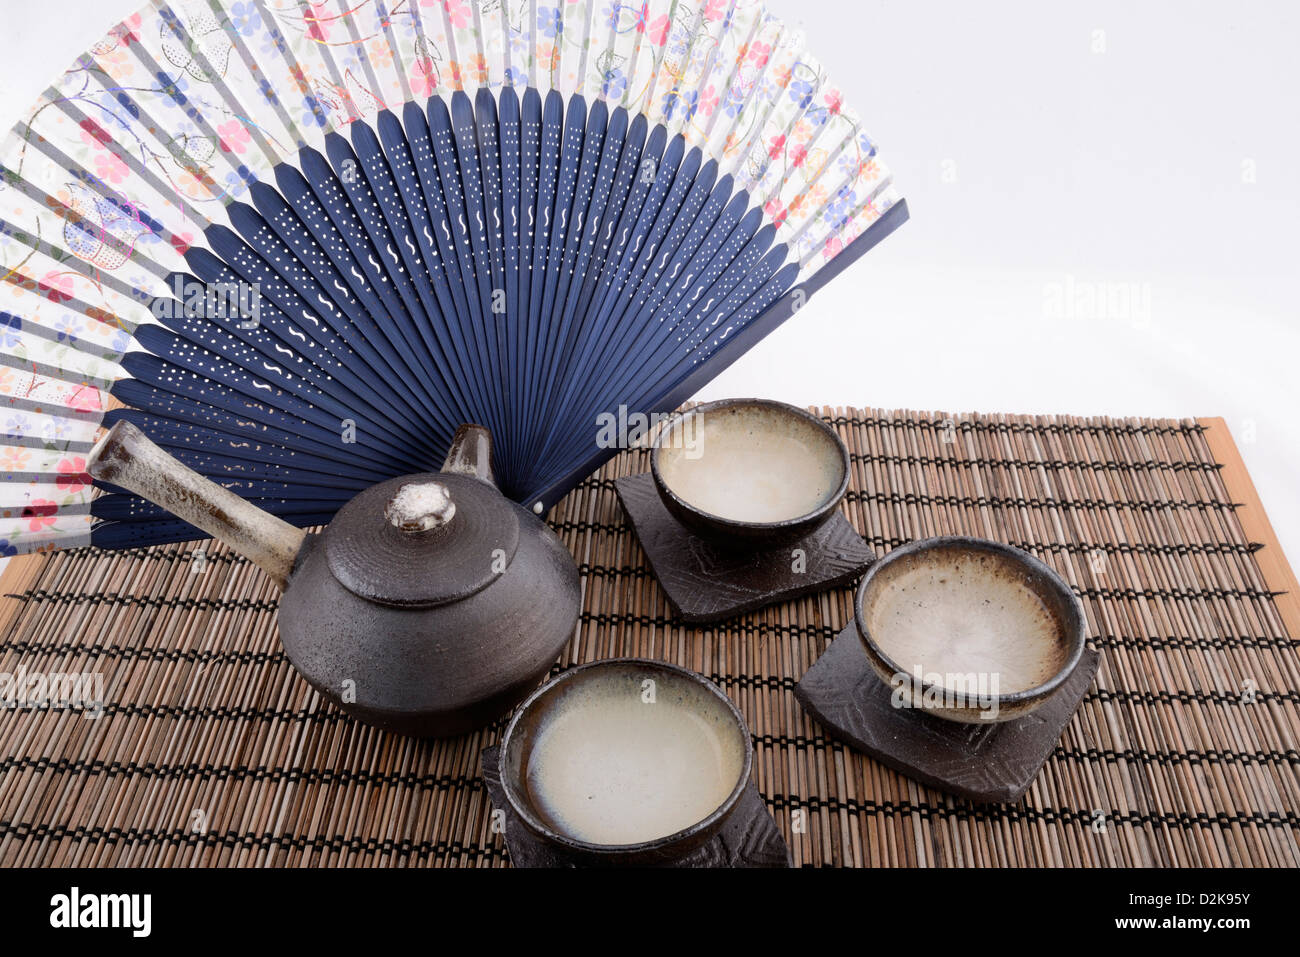 Chinese tea set still images with beautiful traditional fan background. Stock Photo